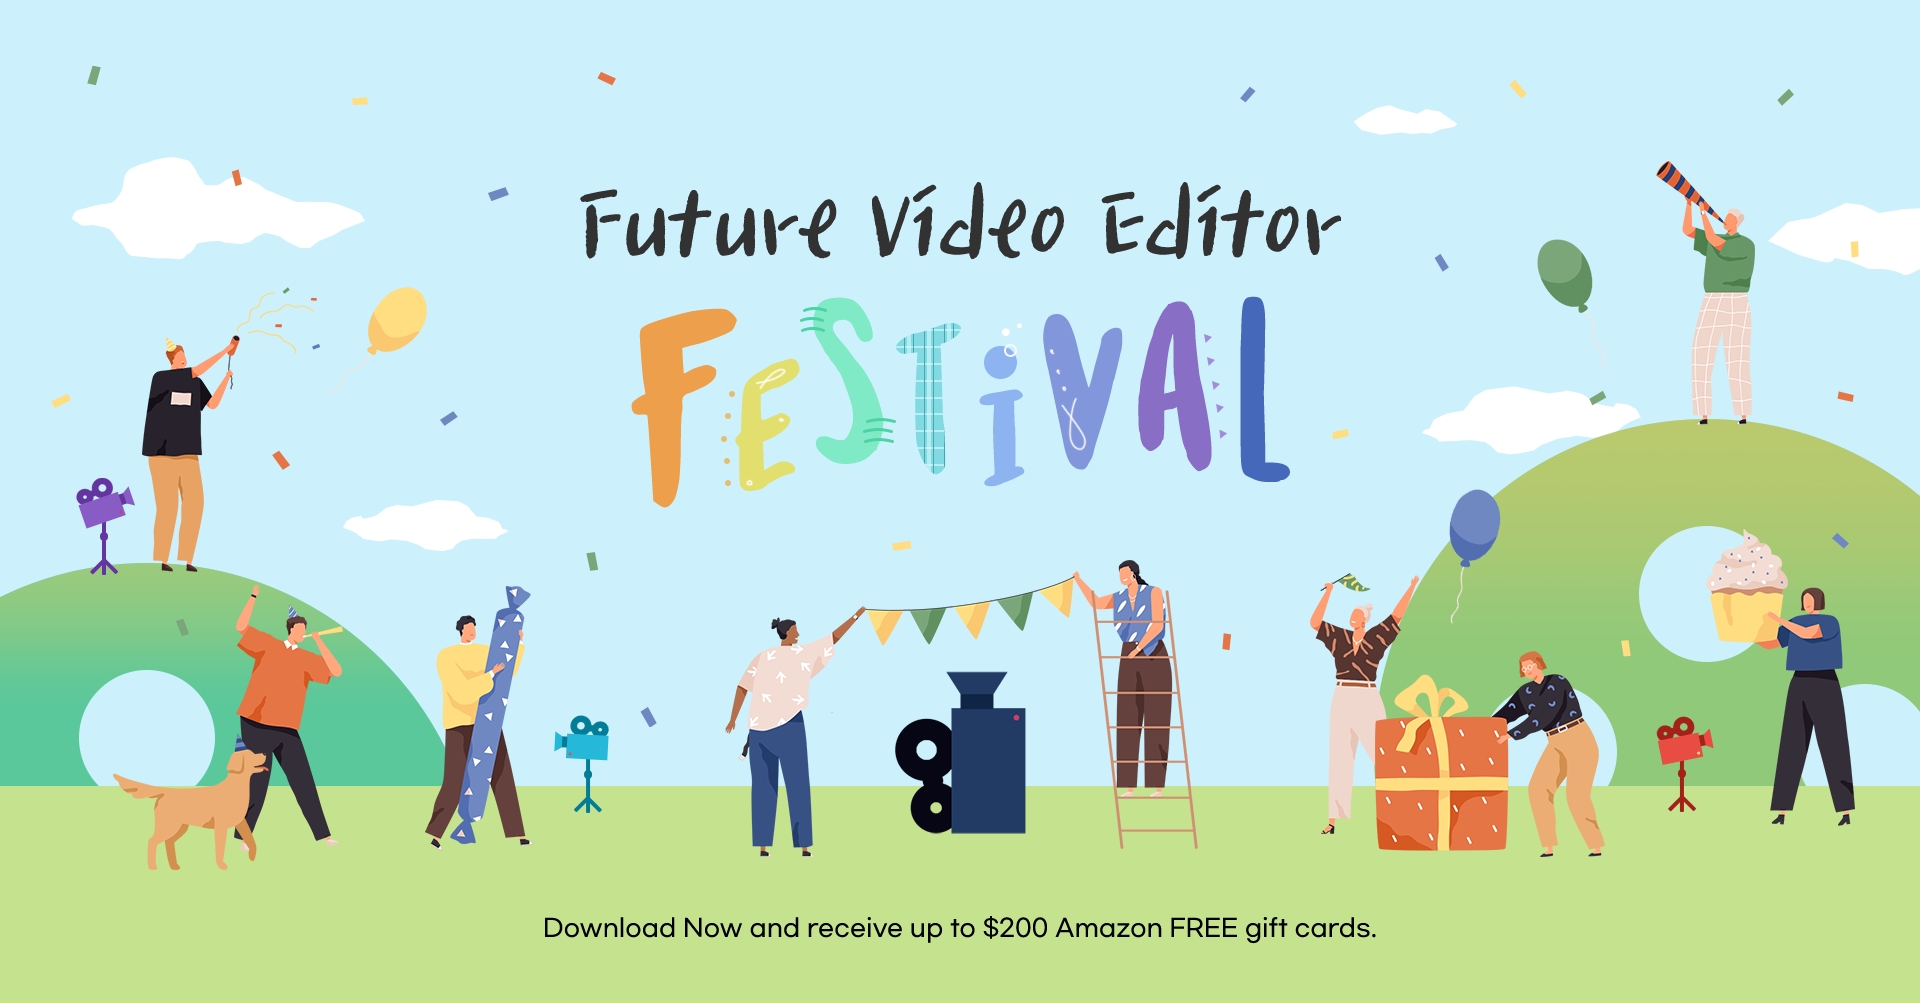 Future Video Editor Festival! Download Now and receive up to $200 Amazon FREE gift cards